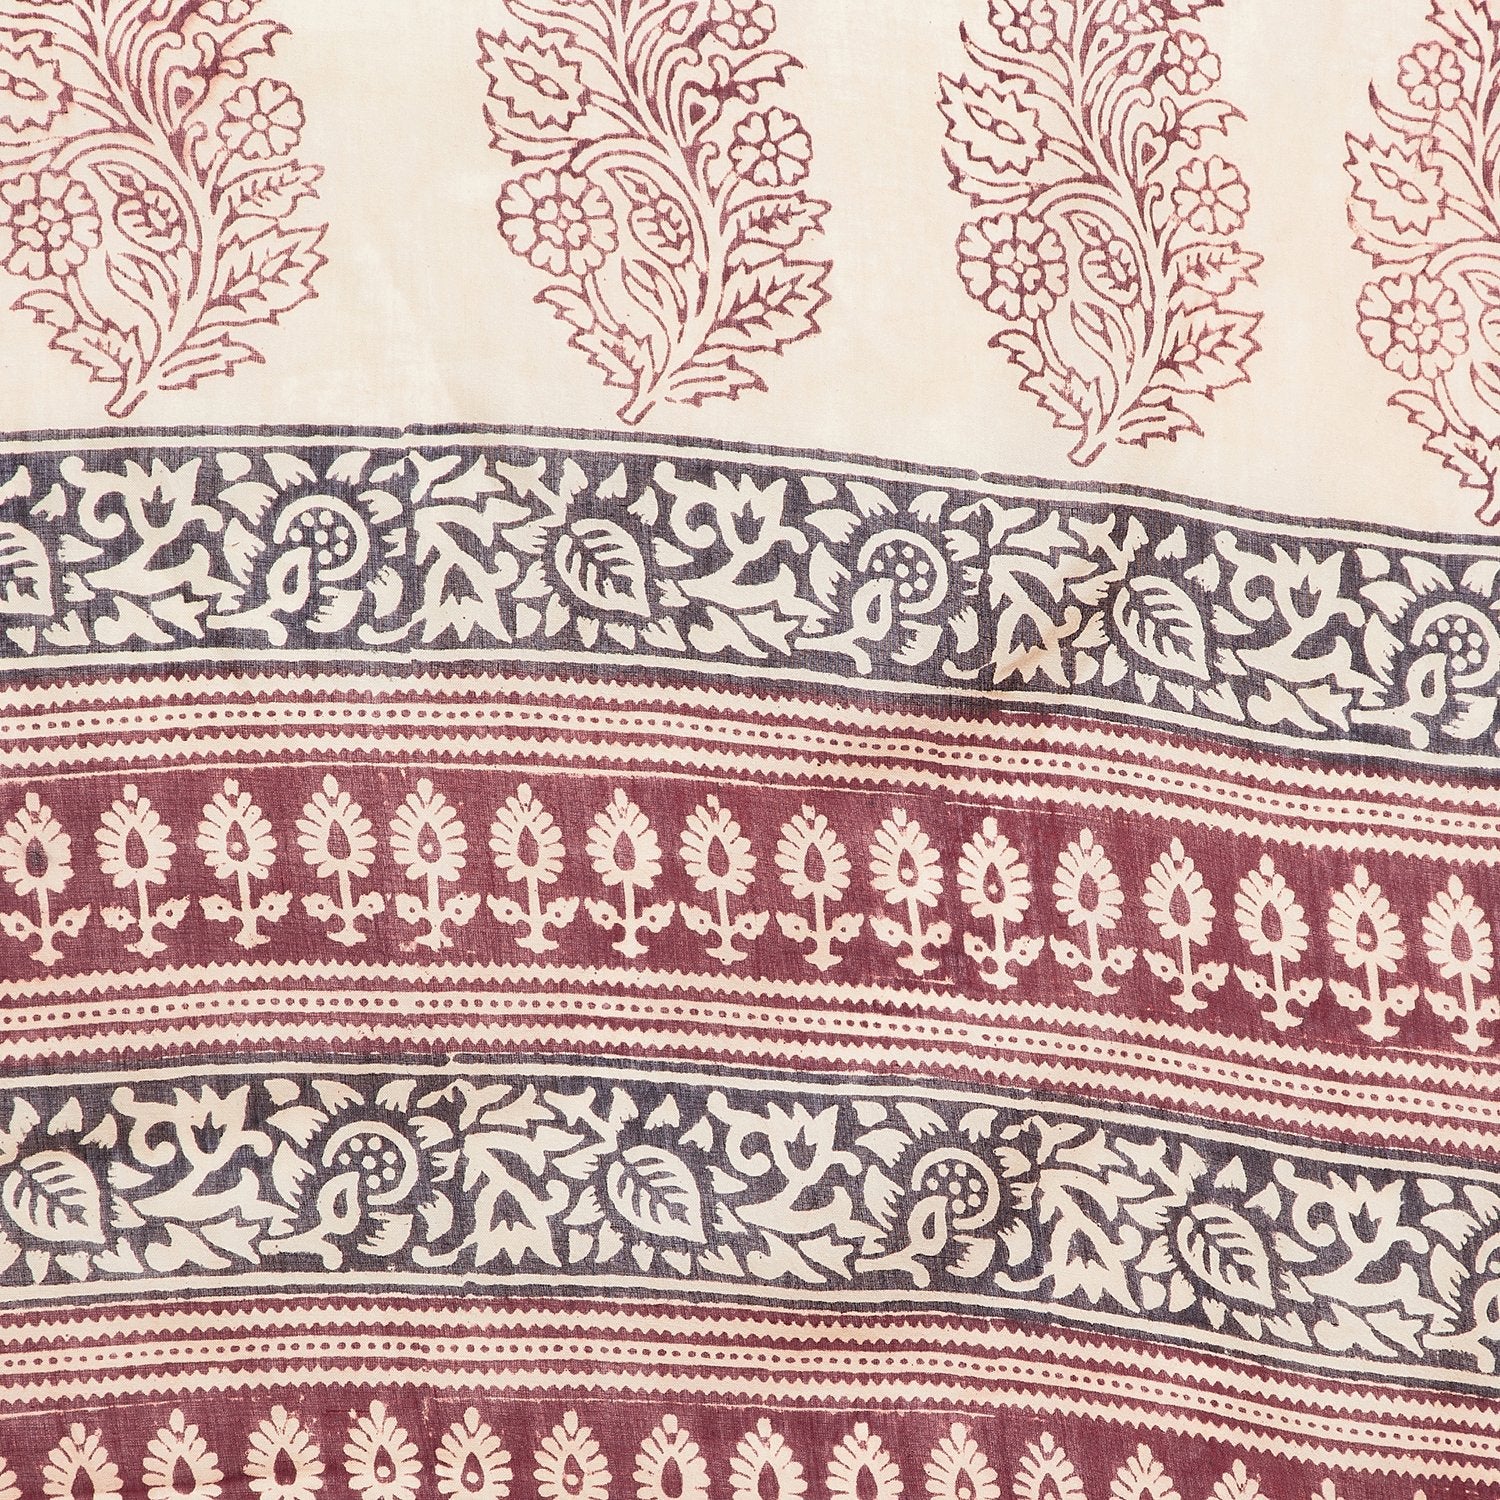 Maroon & Cream-Colored Bagh Hand Block Print Handcrafted Cotton Saree-Saree-Kalakari India-BAPASA0057-Bagh, Cotton, Geographical Indication, Hand Blocks, Hand Crafted, Heritage Prints, Sarees, Sustainable Fabrics-[Linen,Ethnic,wear,Fashionista,Handloom,Handicraft,Indigo,blockprint,block,print,Cotton,Chanderi,Blue, latest,classy,party,bollywood,trendy,summer,style,traditional,formal,elegant,unique,style,hand,block,print, dabu,booti,gift,present,glamorous,affordable,collectible,Sari,Saree,printed,